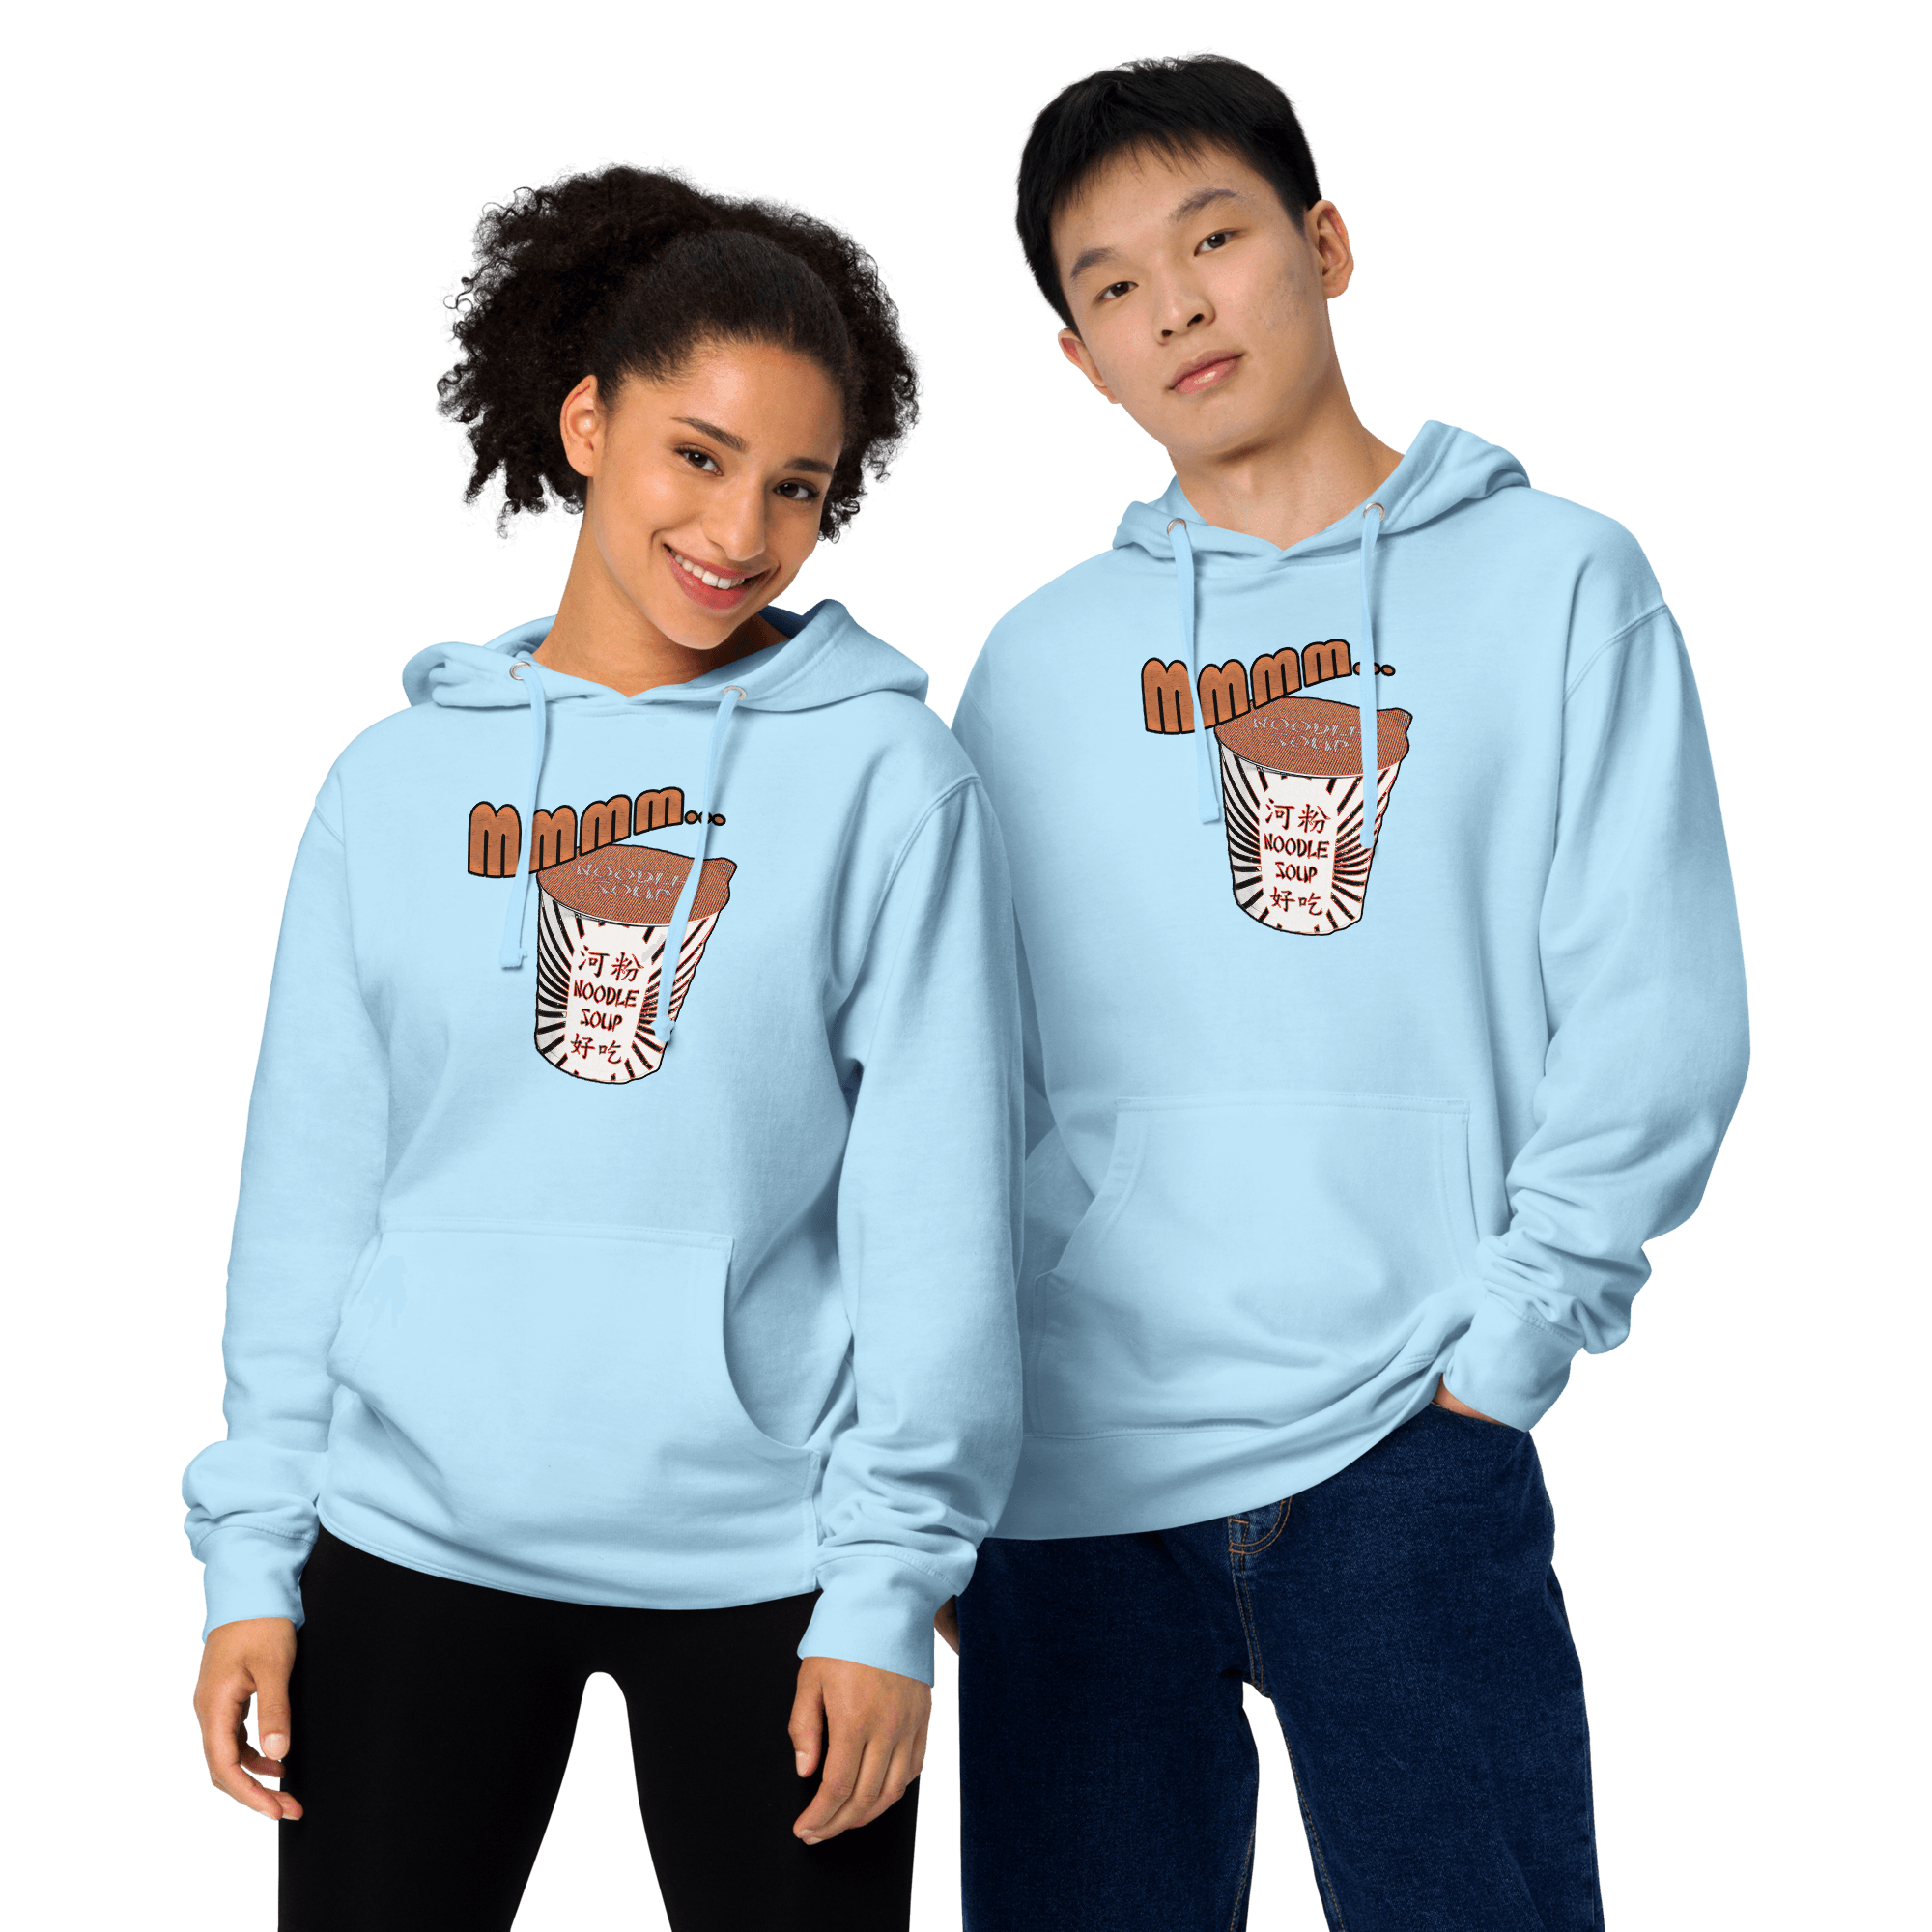 Mmm, Noodle Soup Unisex midweight hoodie